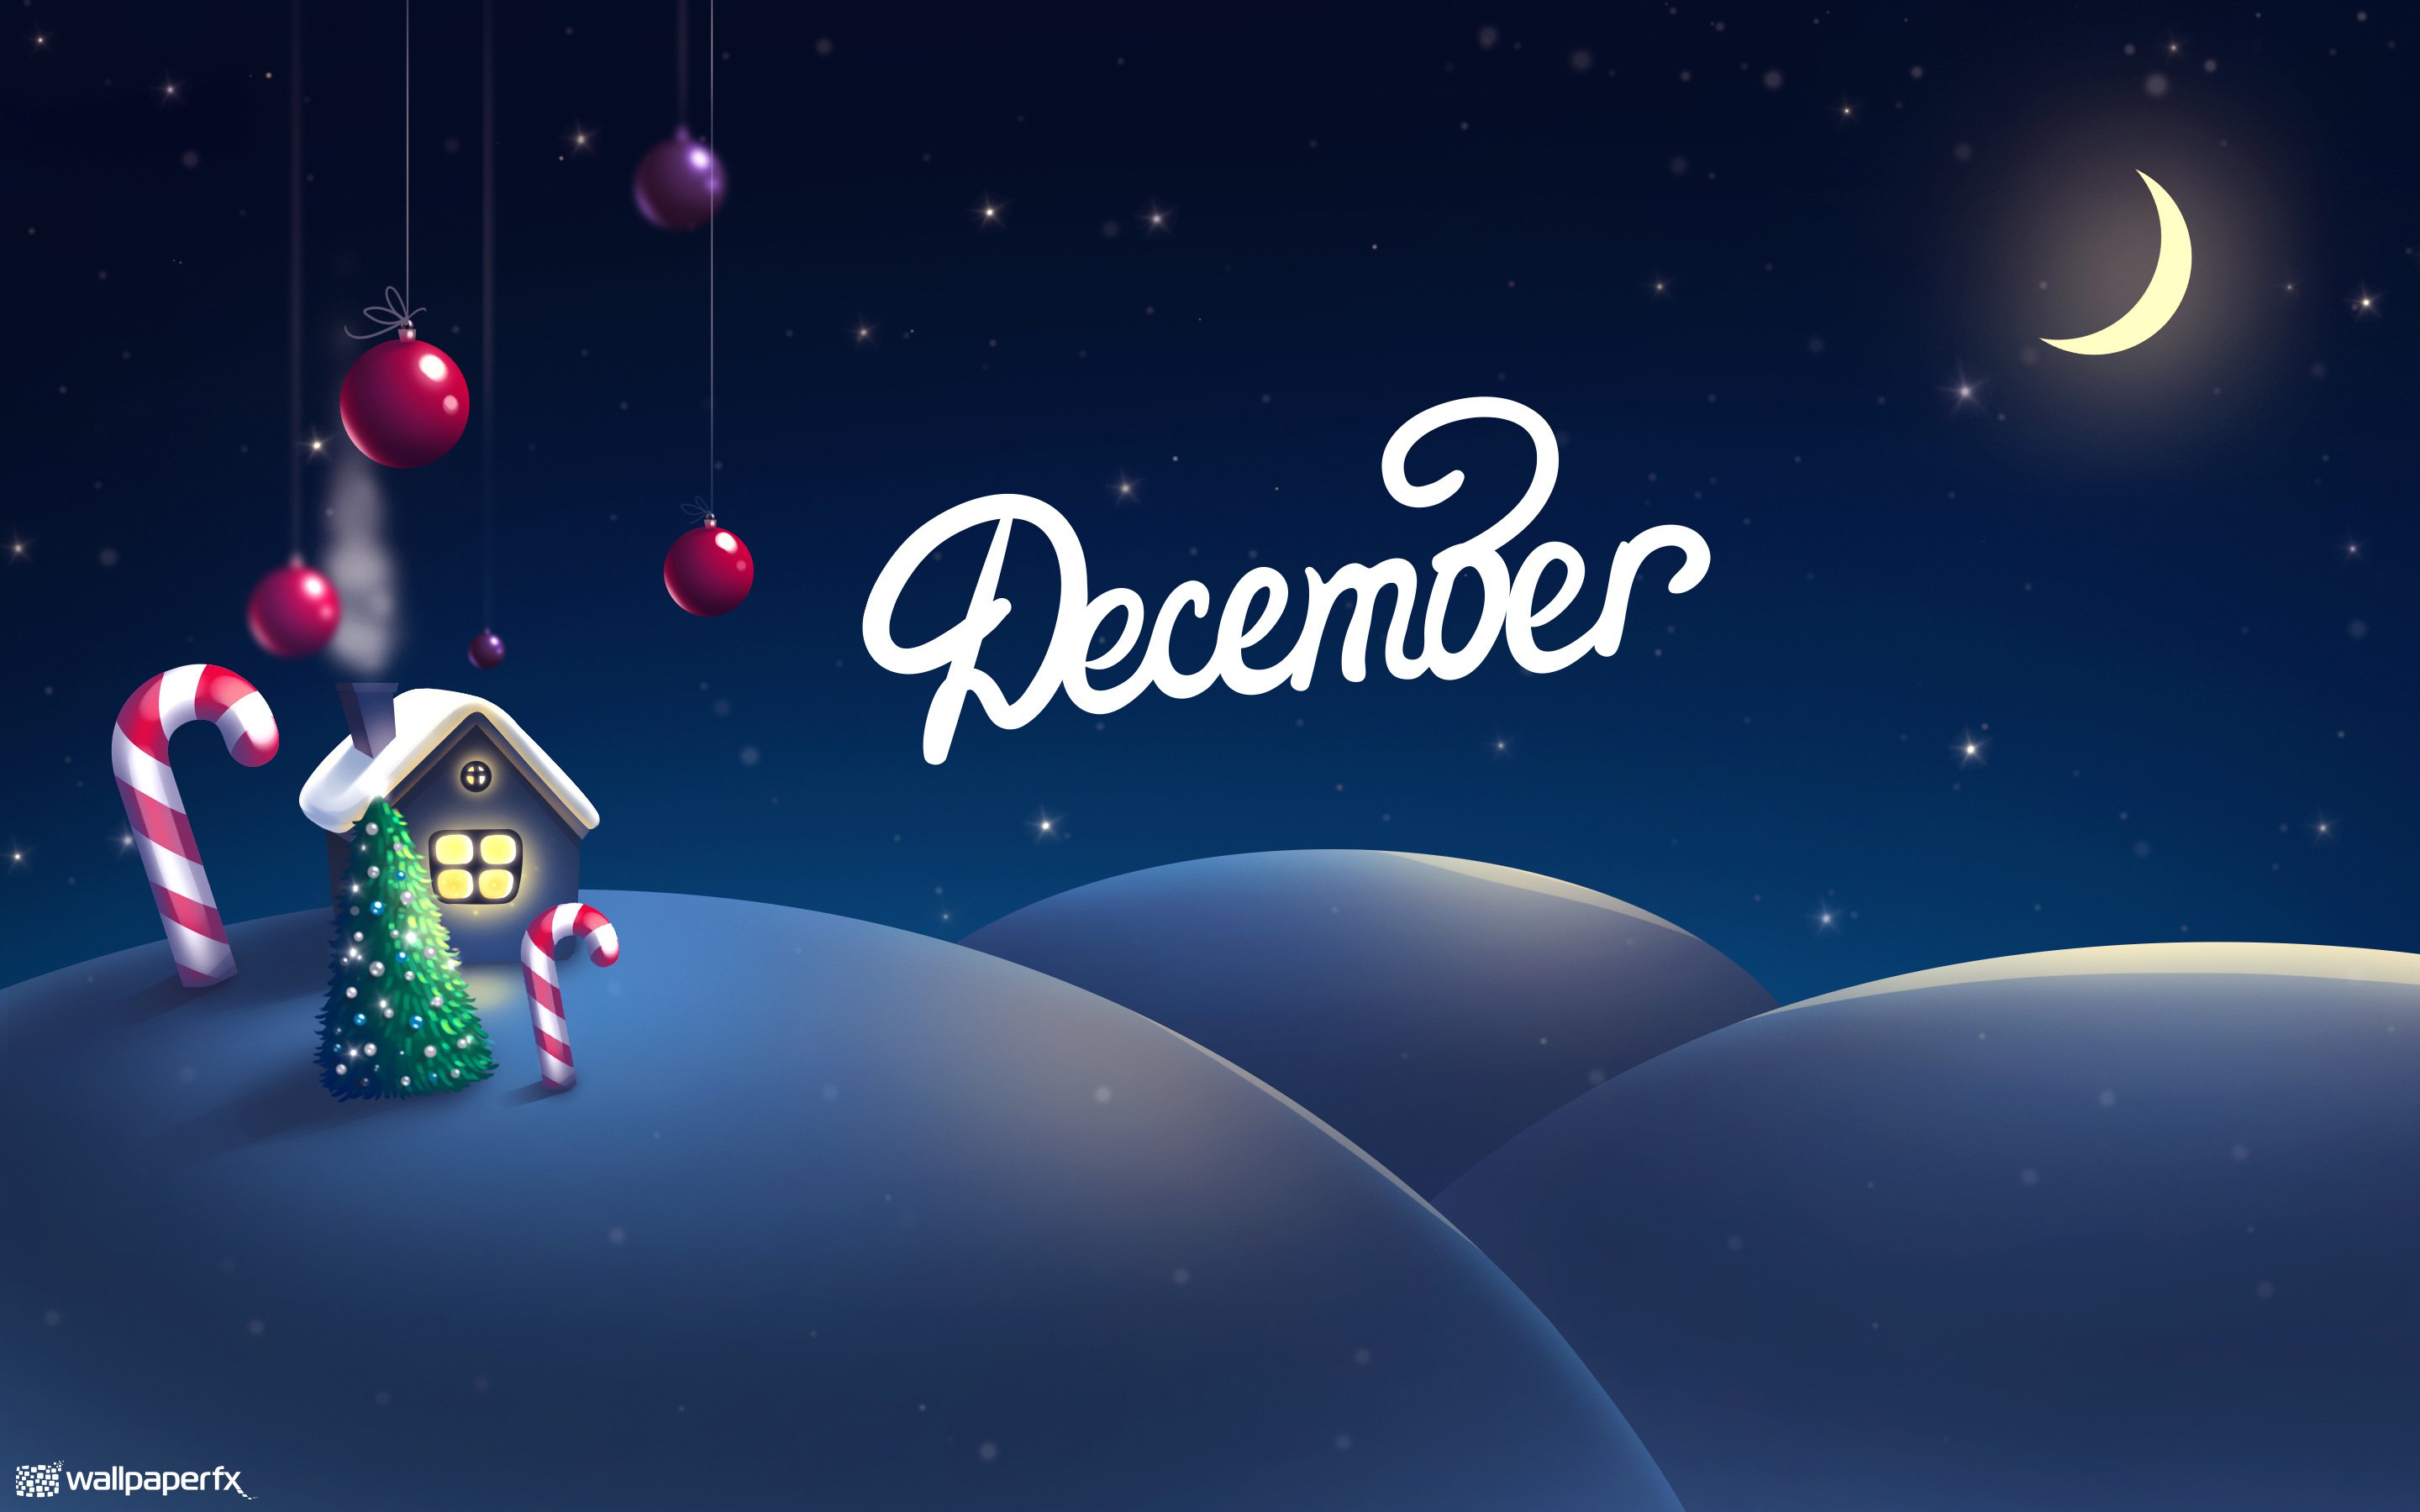 december-hd-celebrations-4k-wallpapers-images-backgrounds-photos